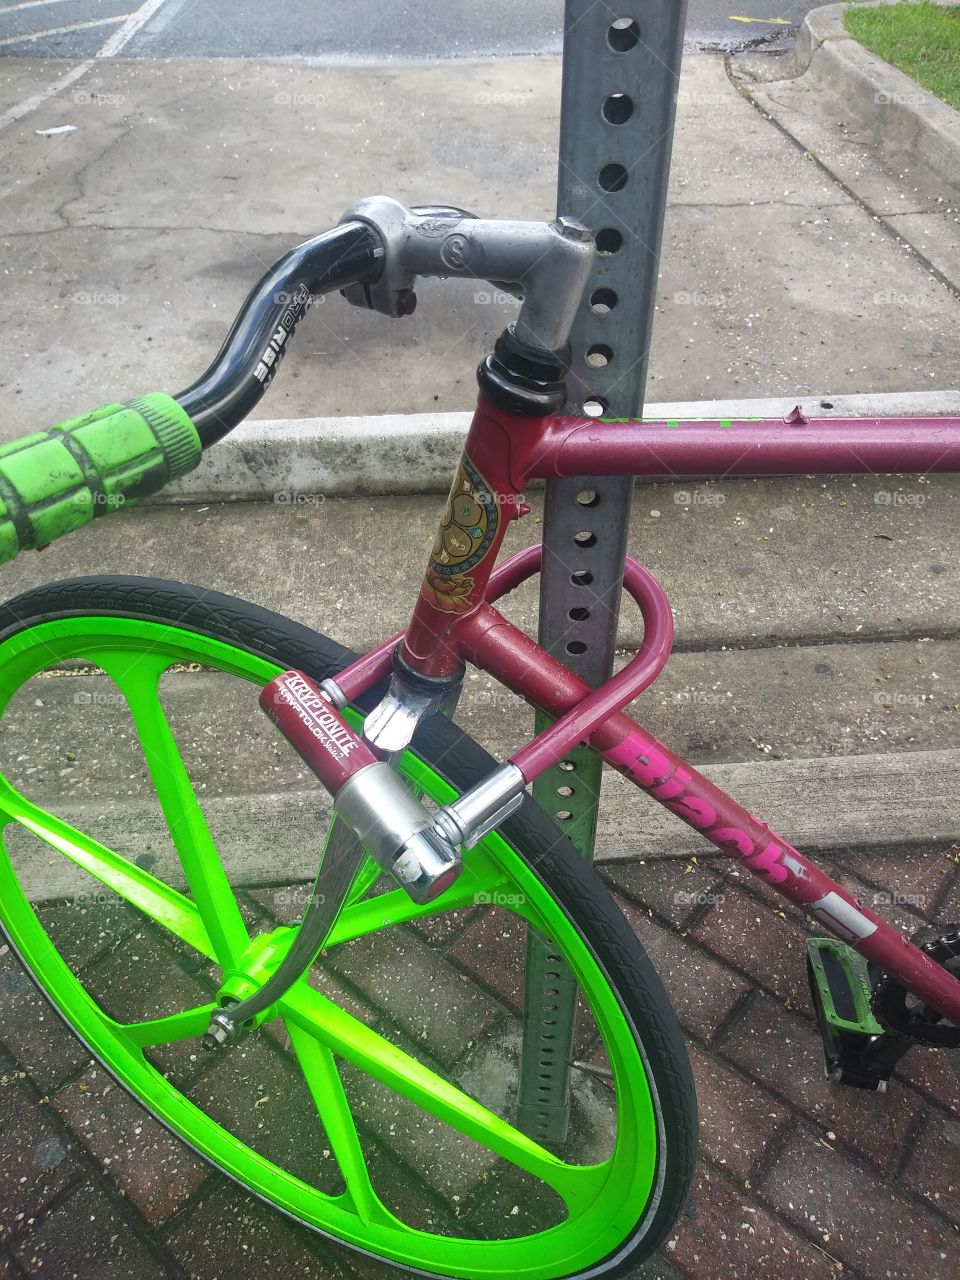 Bicycle locked up in Four Points area of Jacksonville FL. The Hipster District